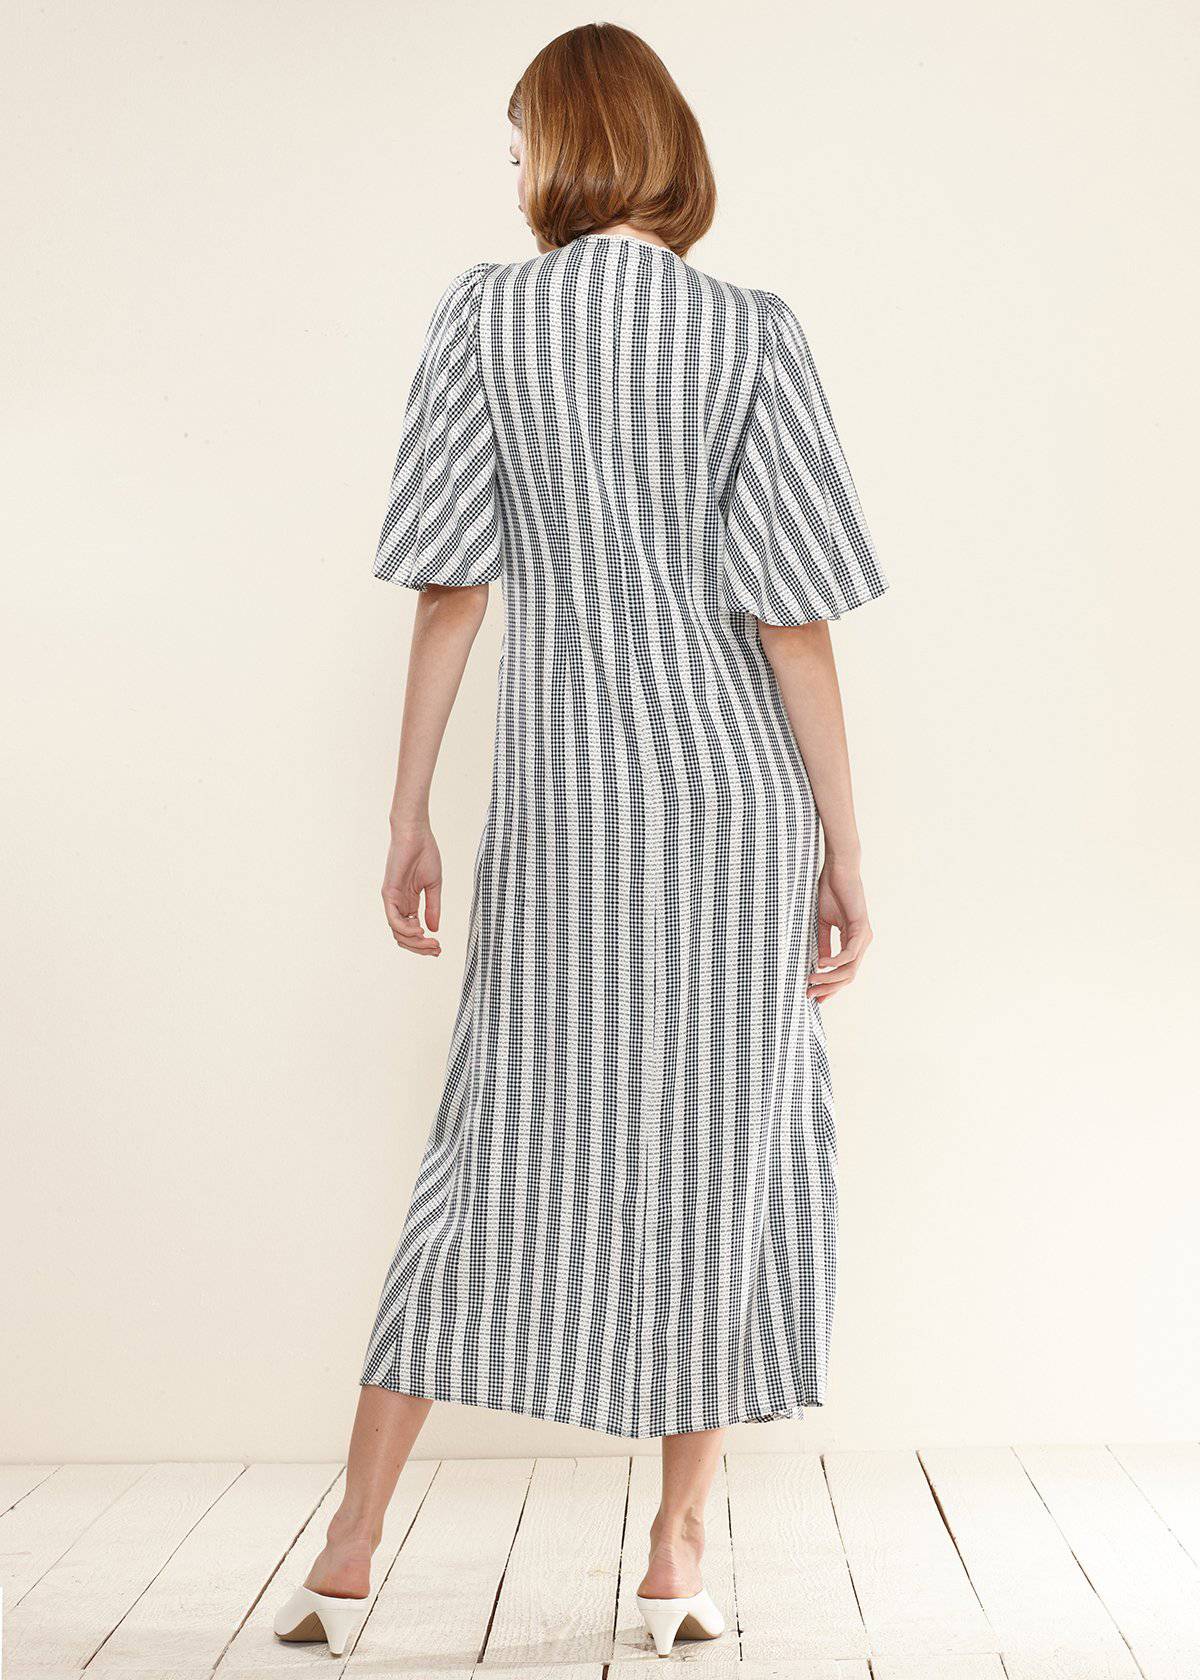 Buy Lace Trim Tie Front Maxi Dress in Ditsy Gingham by Shop at Konus